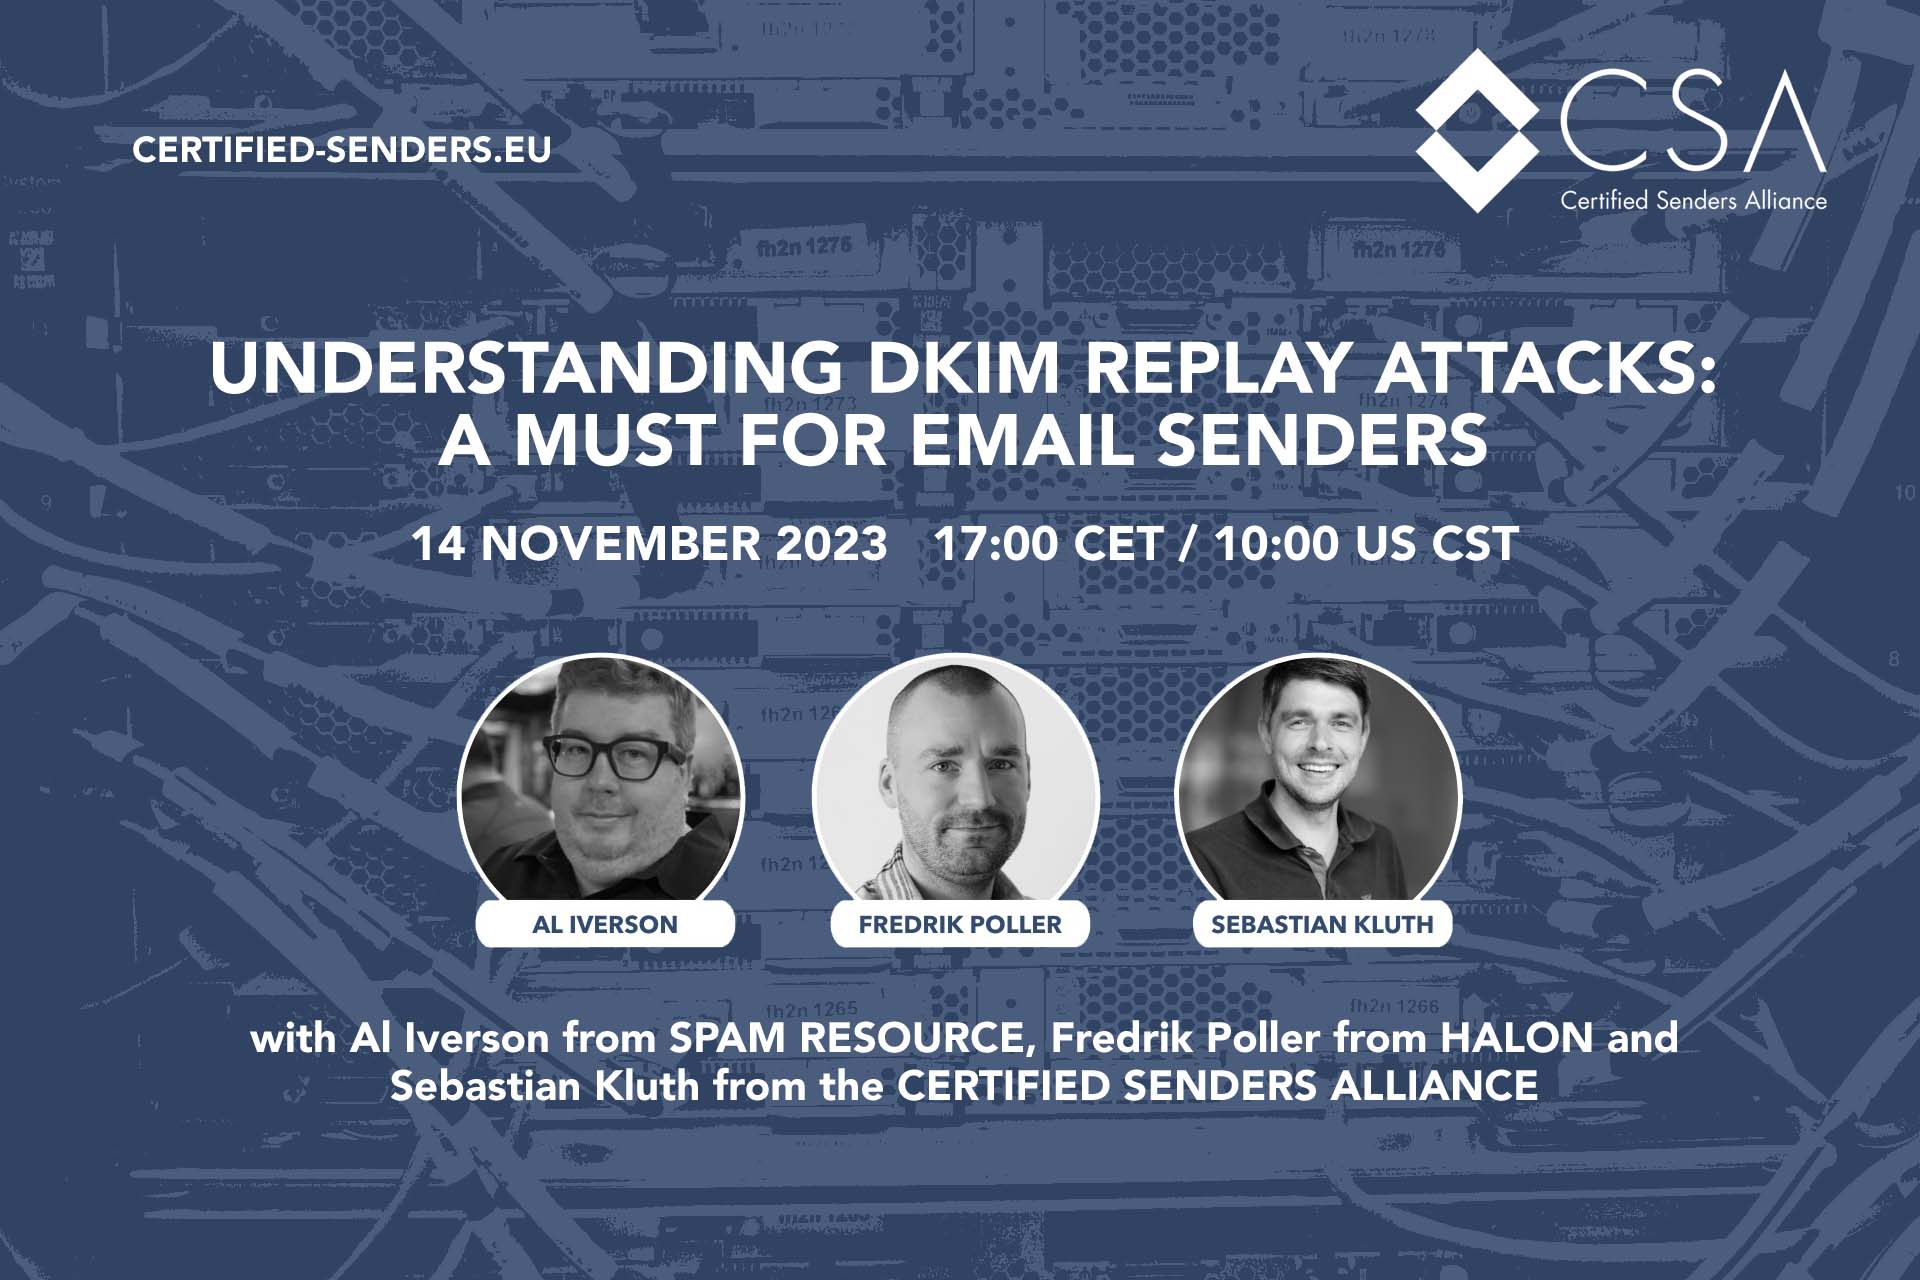 Join me and the CSA to learn about DKIM Replay Attacks